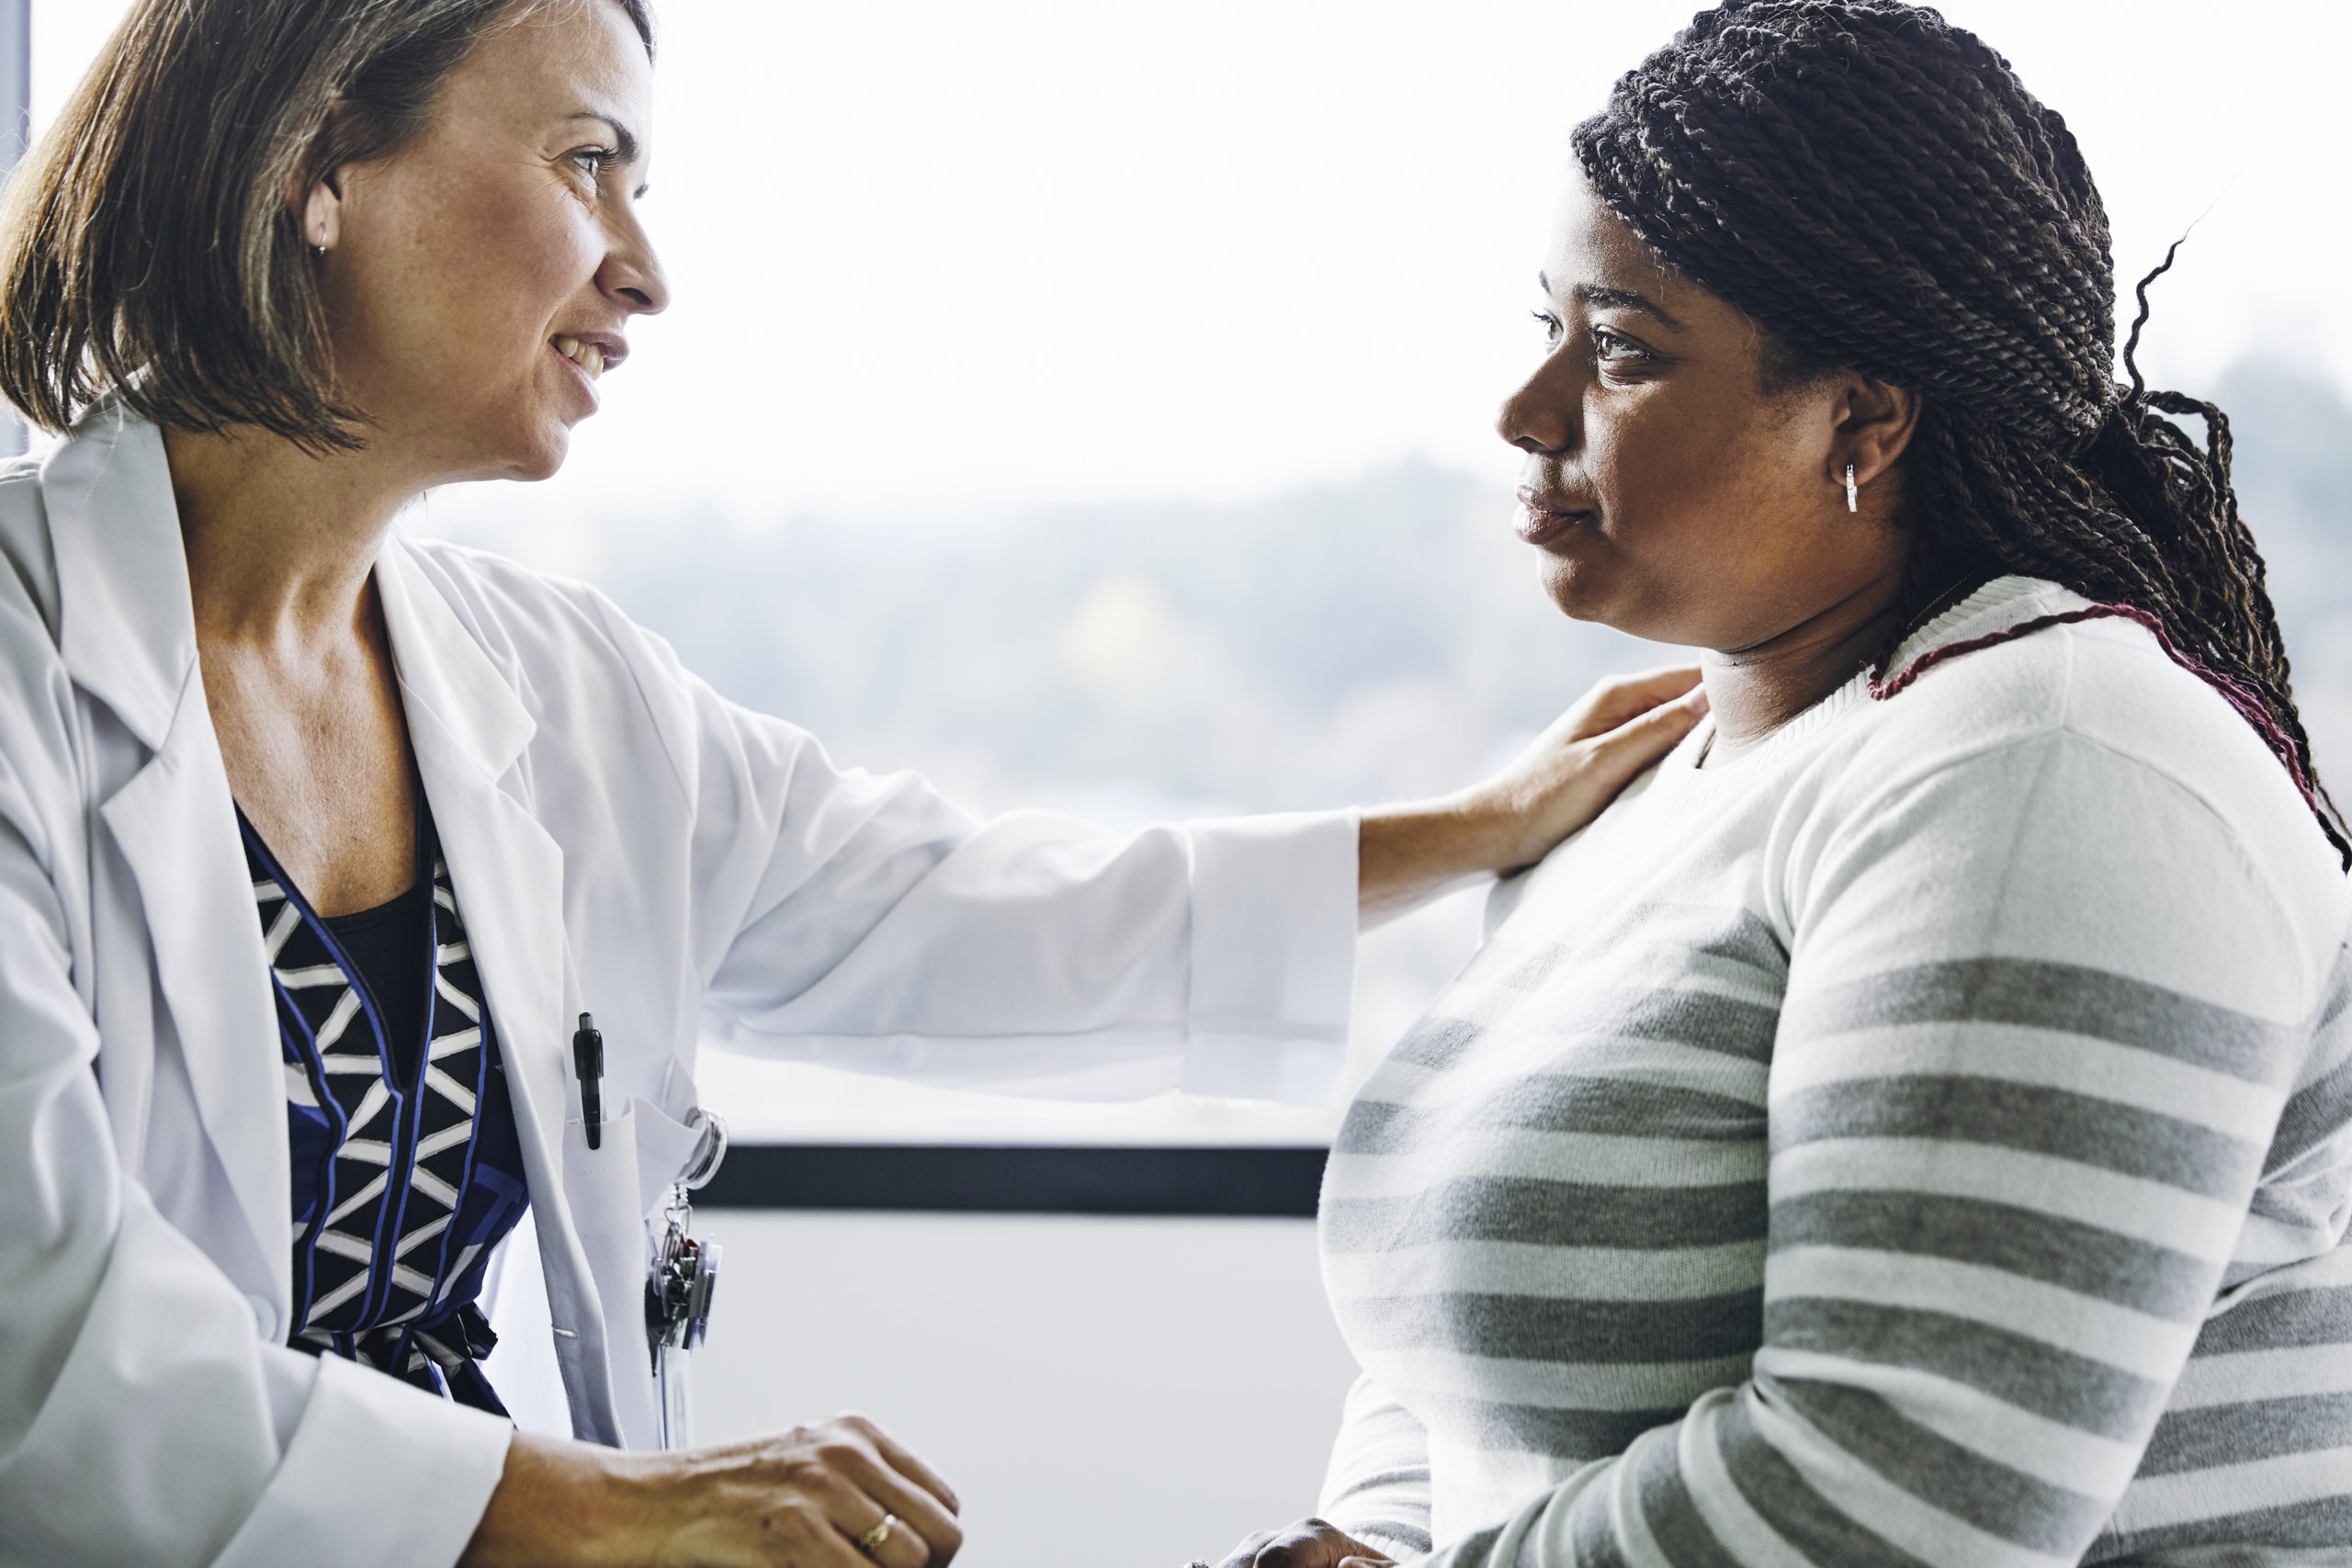 primary care: female doctor comforting female patient